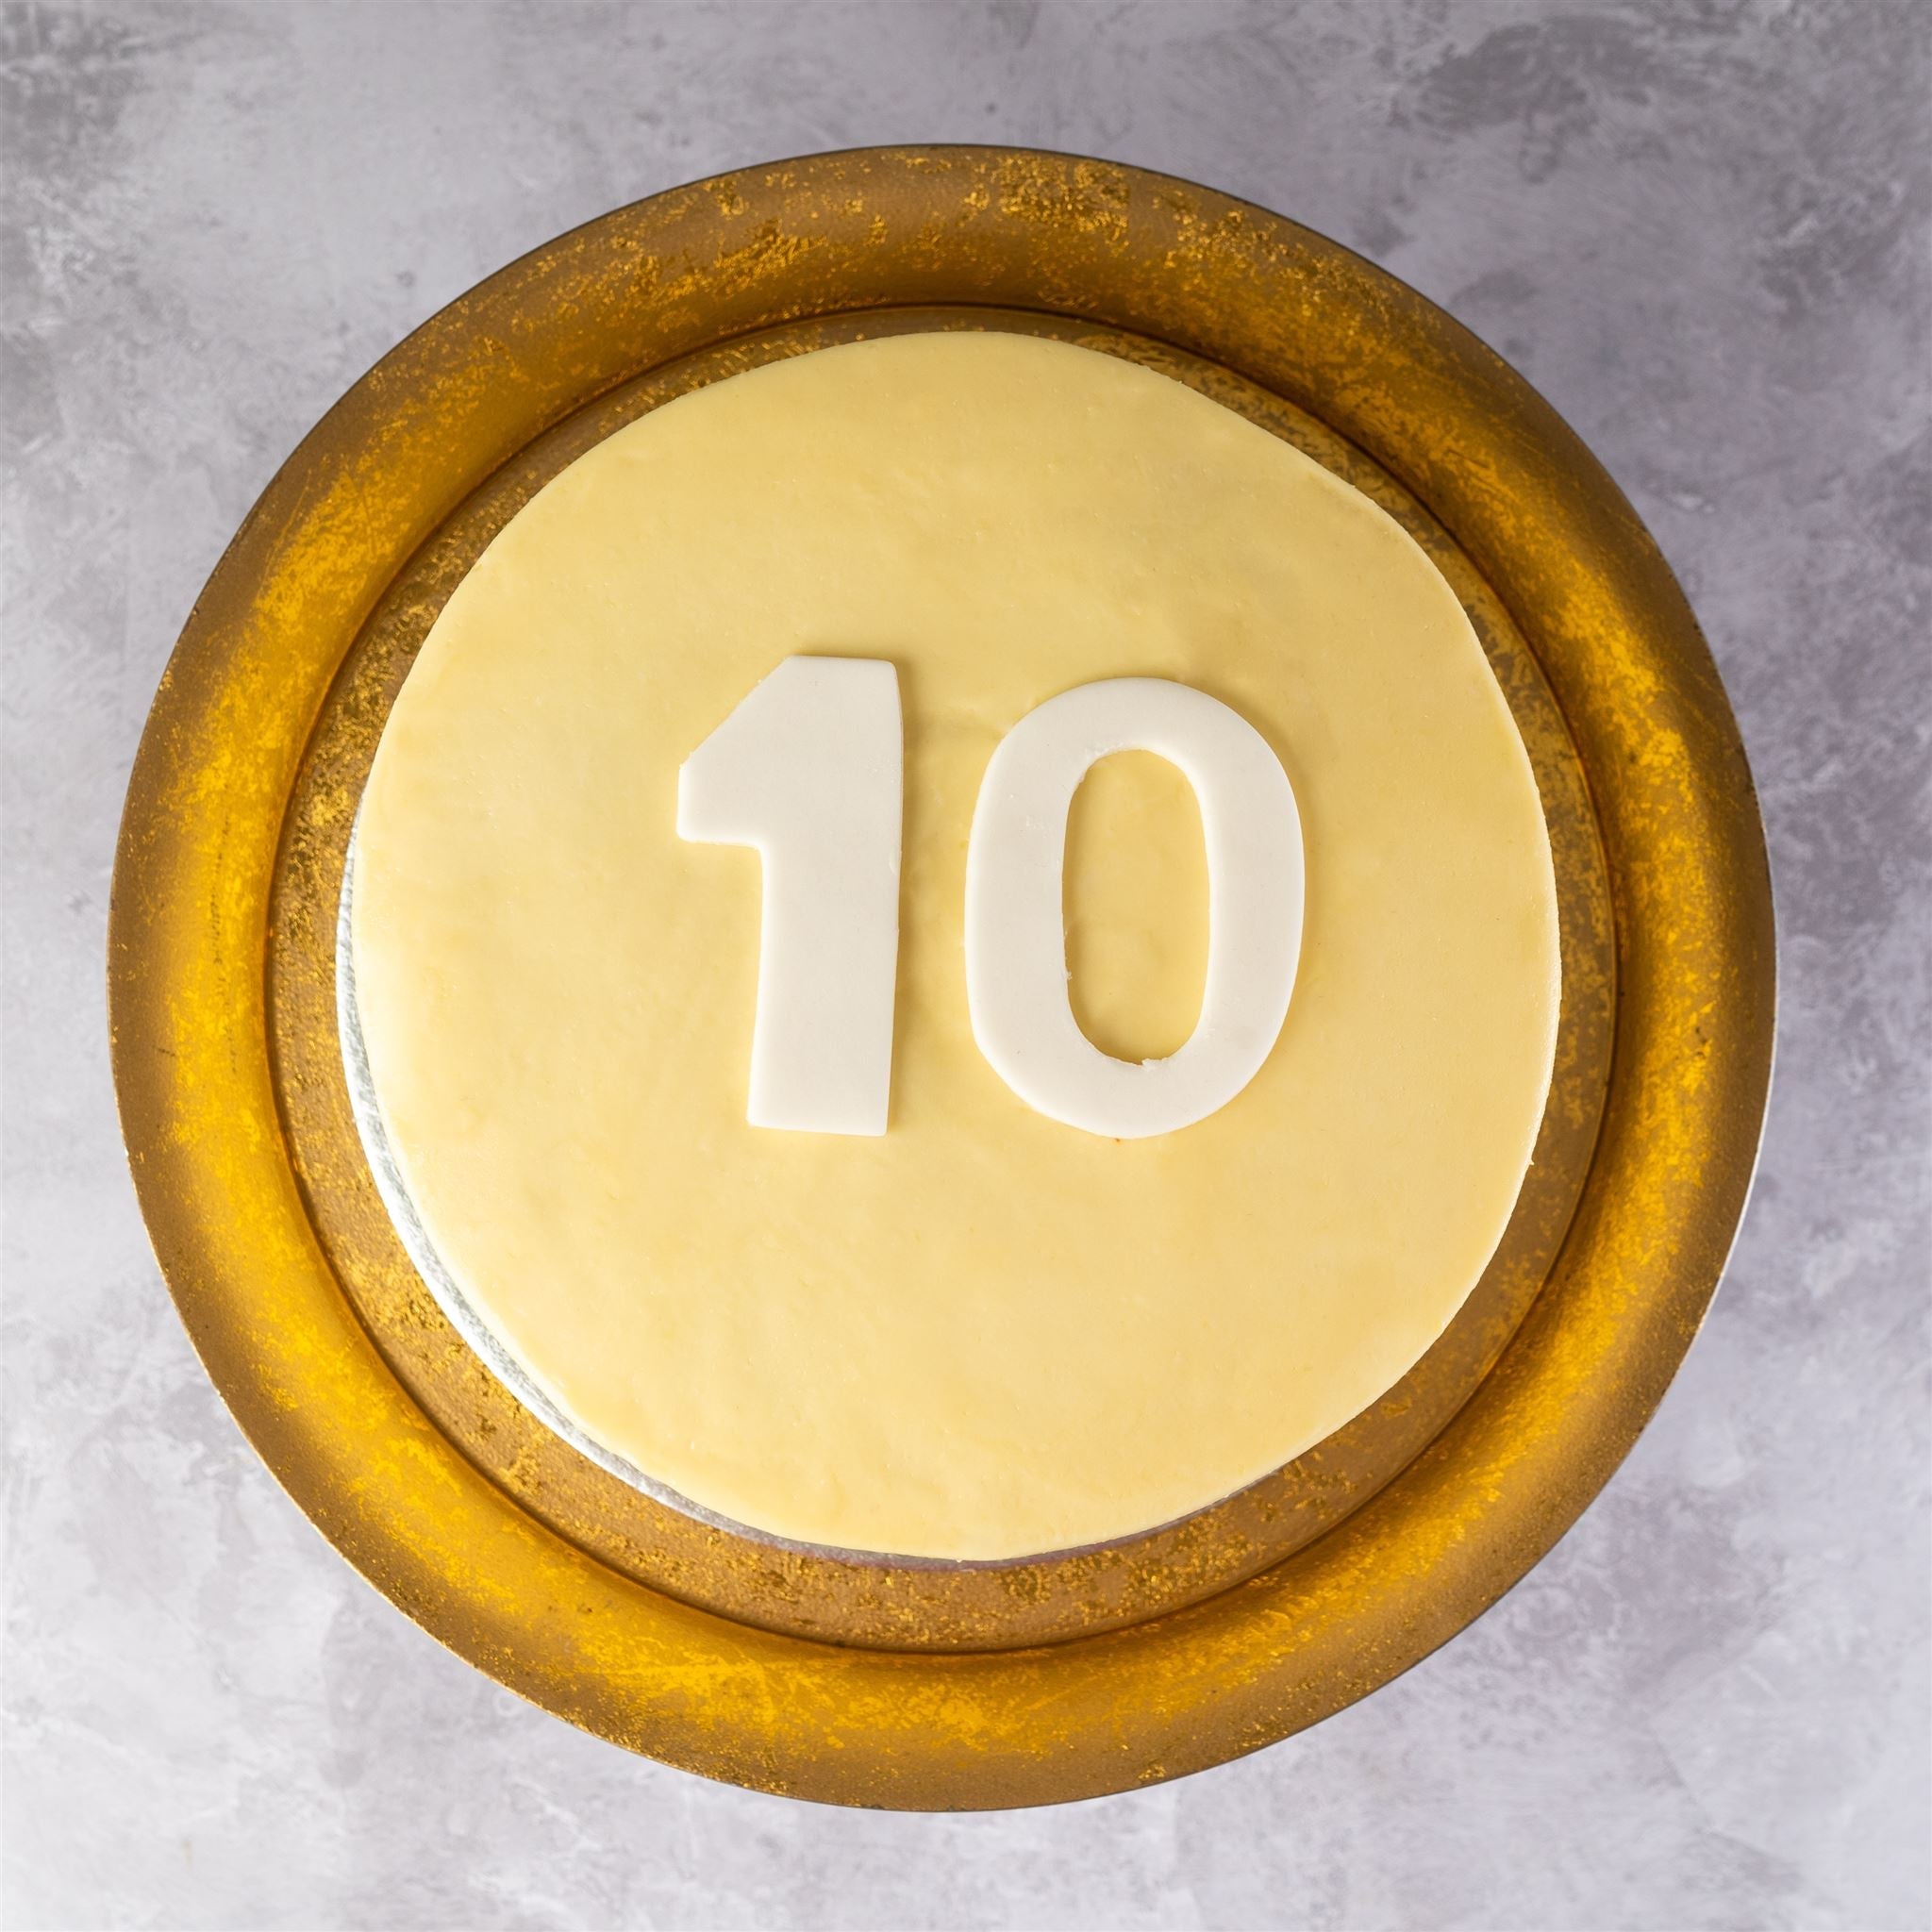 Chocolate Birthday cake with golden number 10, 3D rendering Stock Photo by  ©alexlmx 159520224